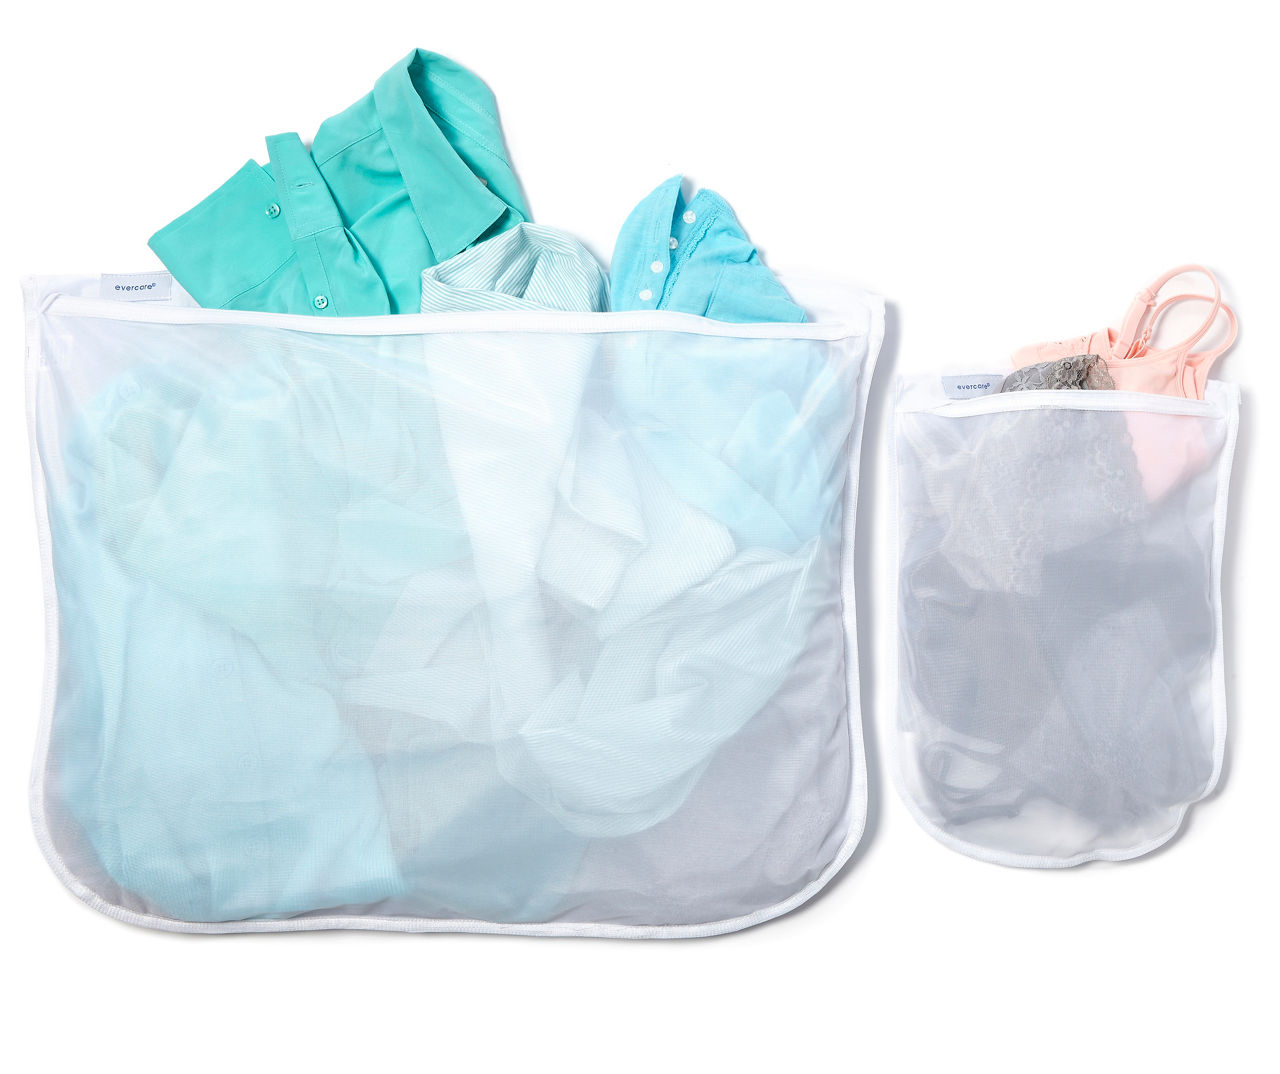 Best Laundry Wash Bags - Why You Should Use Mesh Bags for Delicates